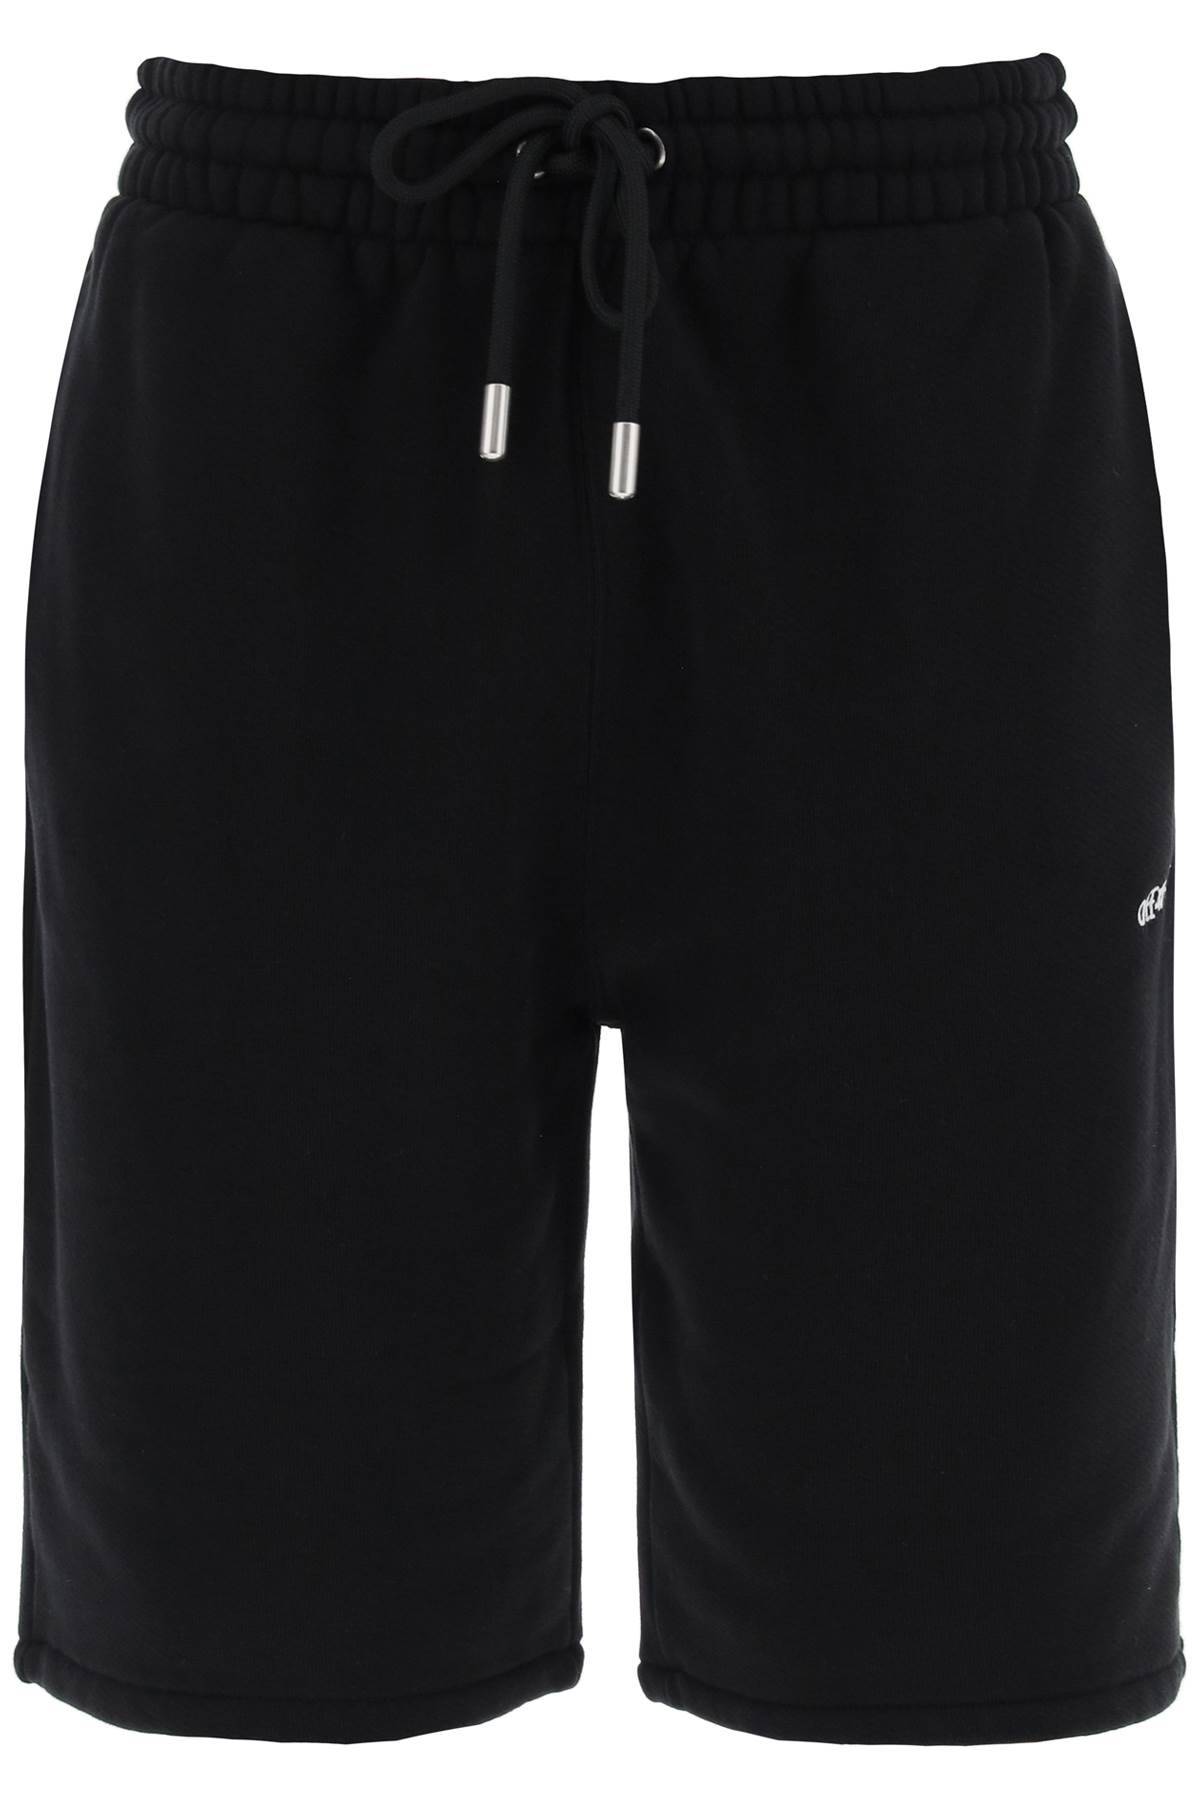 OFF-WHITE OFF-WHITE "sporty bermuda shorts with embroidered arrow